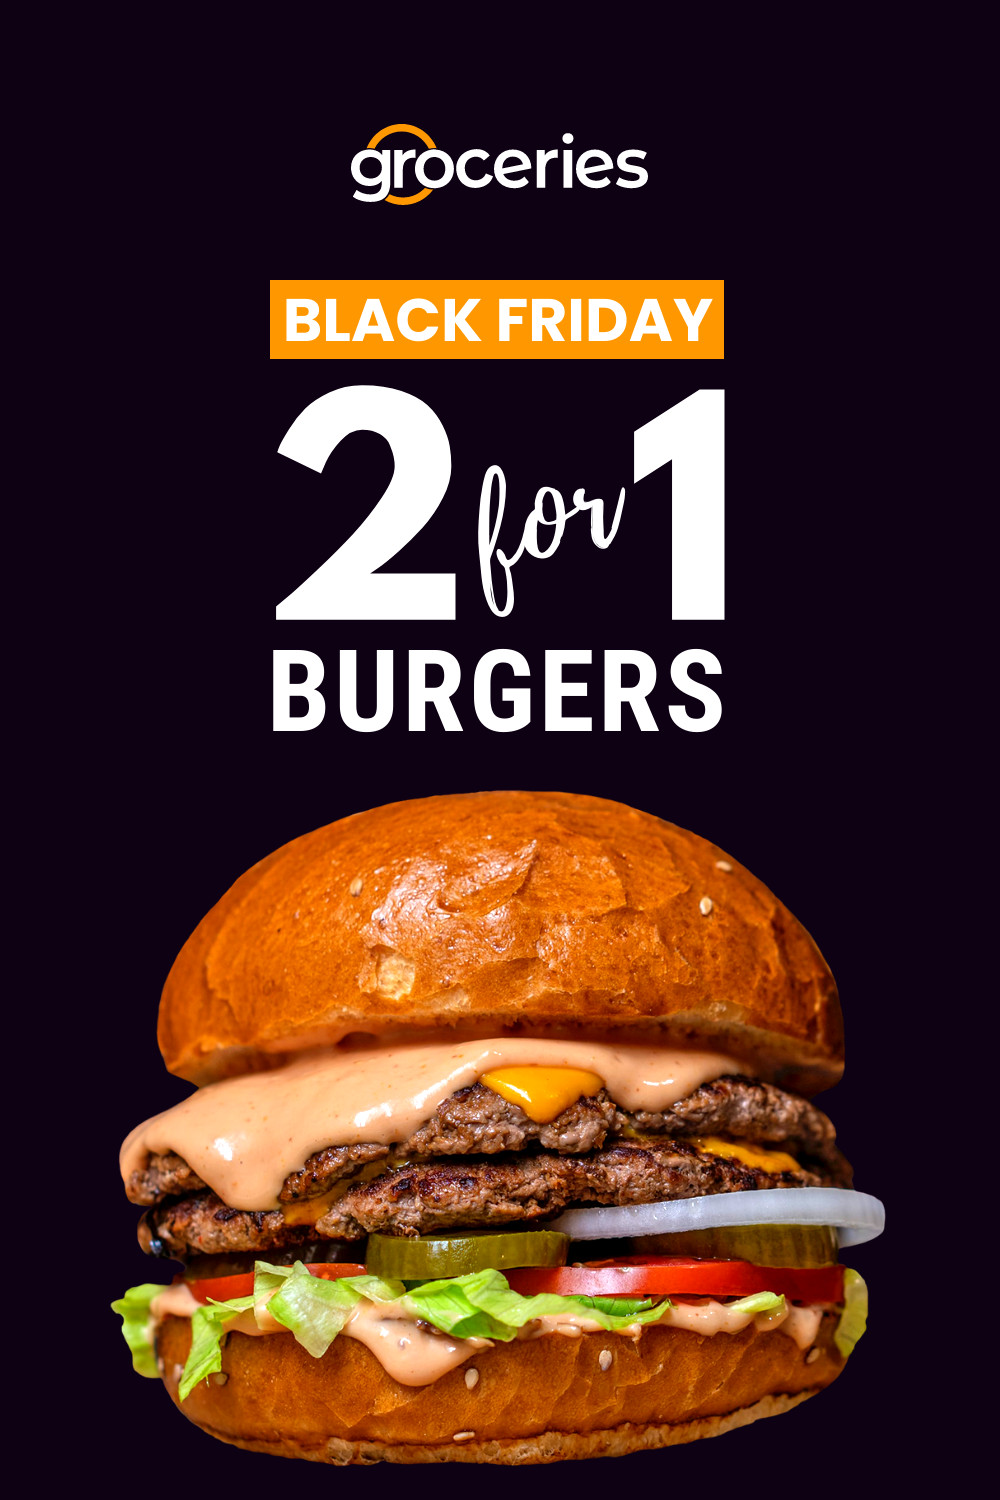 Black Friday 2 for 1 Burgers Inline Rectangle 300x250